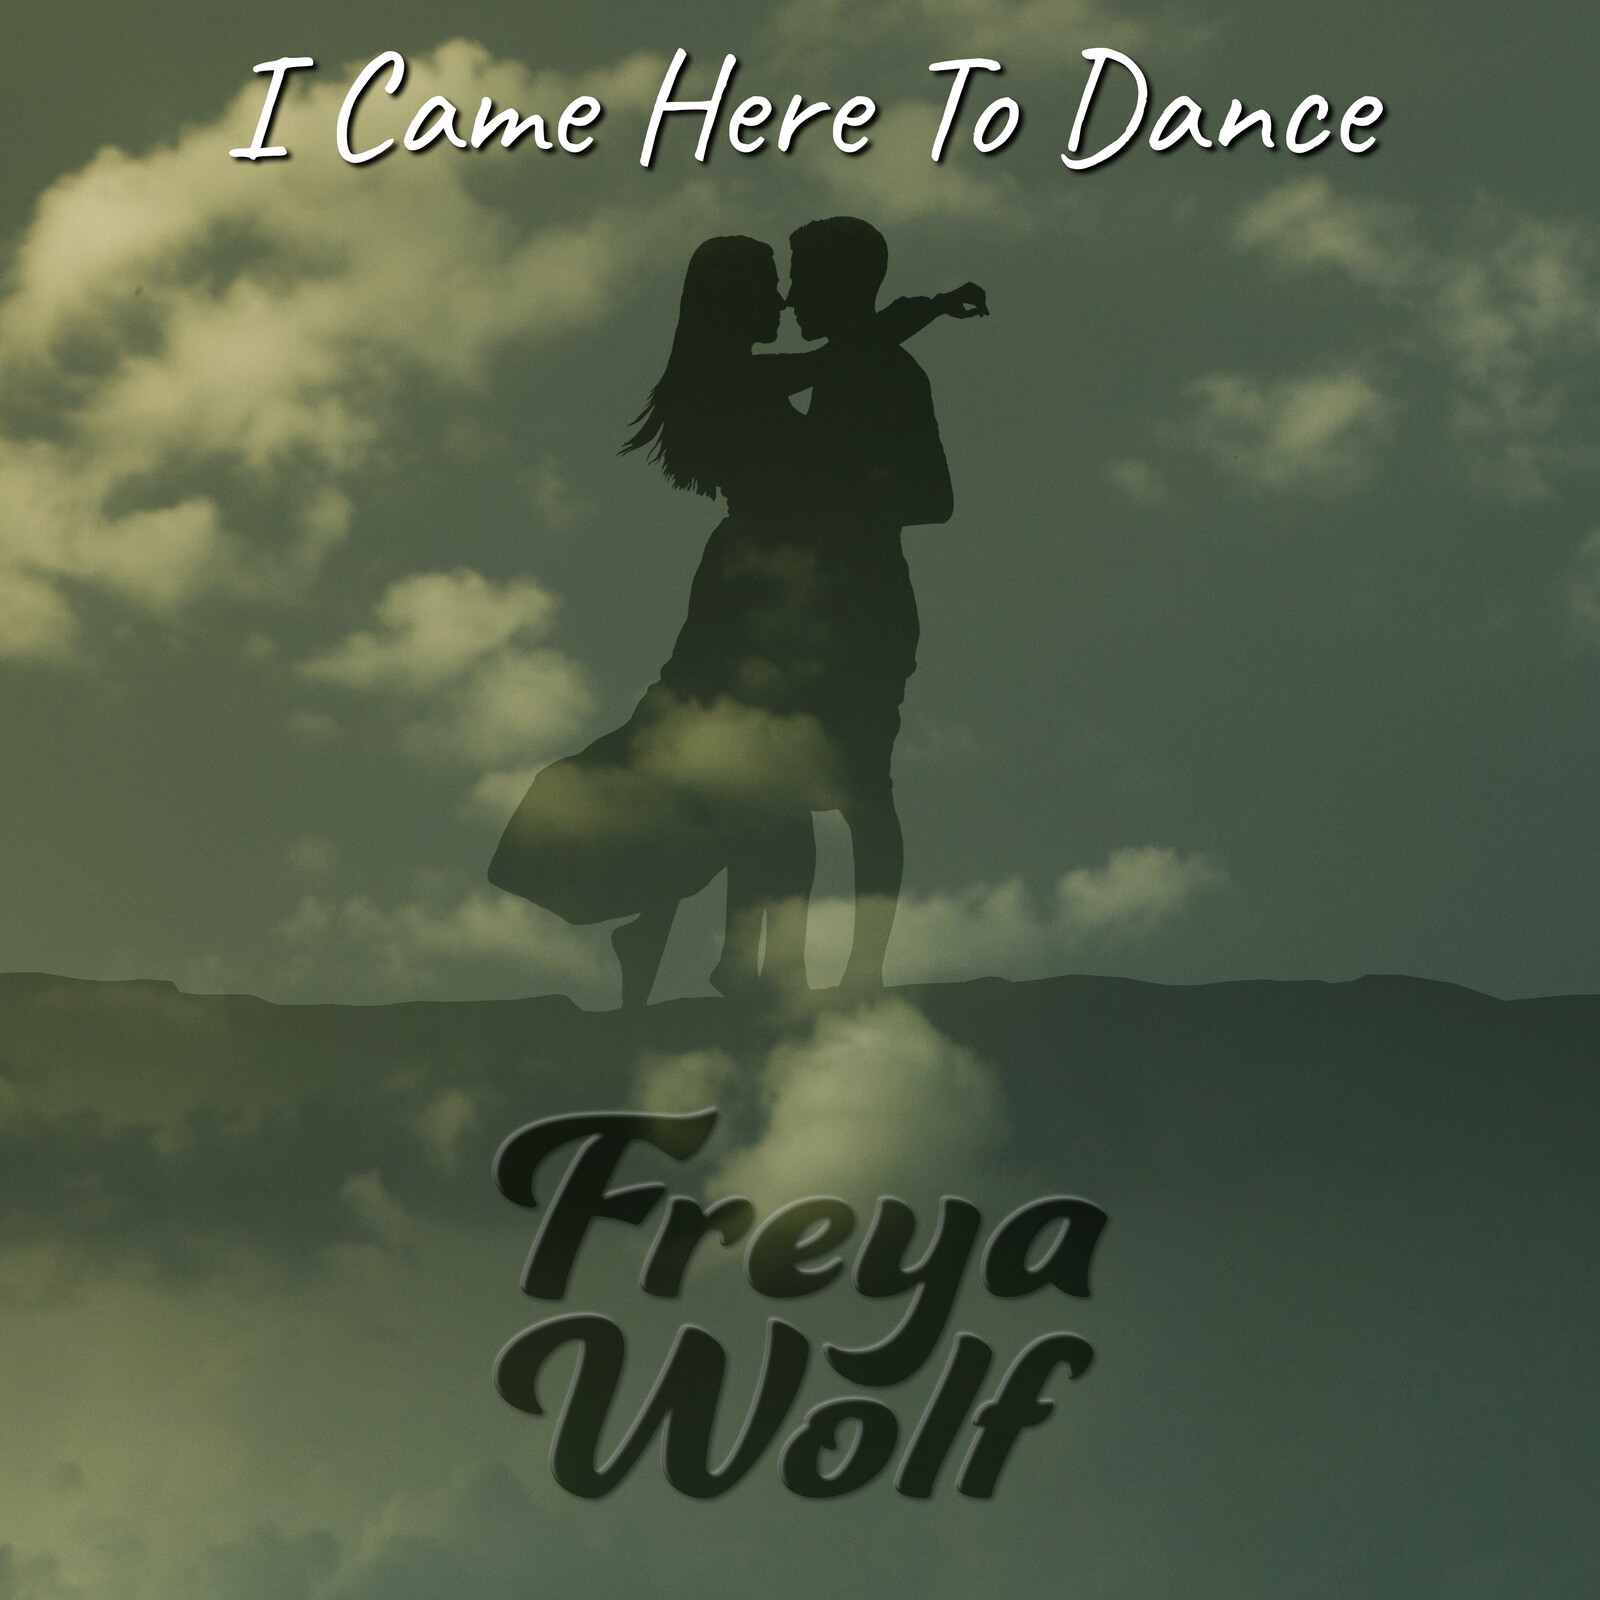 Freya Wolf - "I Came Here to Dance" single cover.

Main Images supplied by client: Matthew Henry and Jonathan Borba via unsplash.com